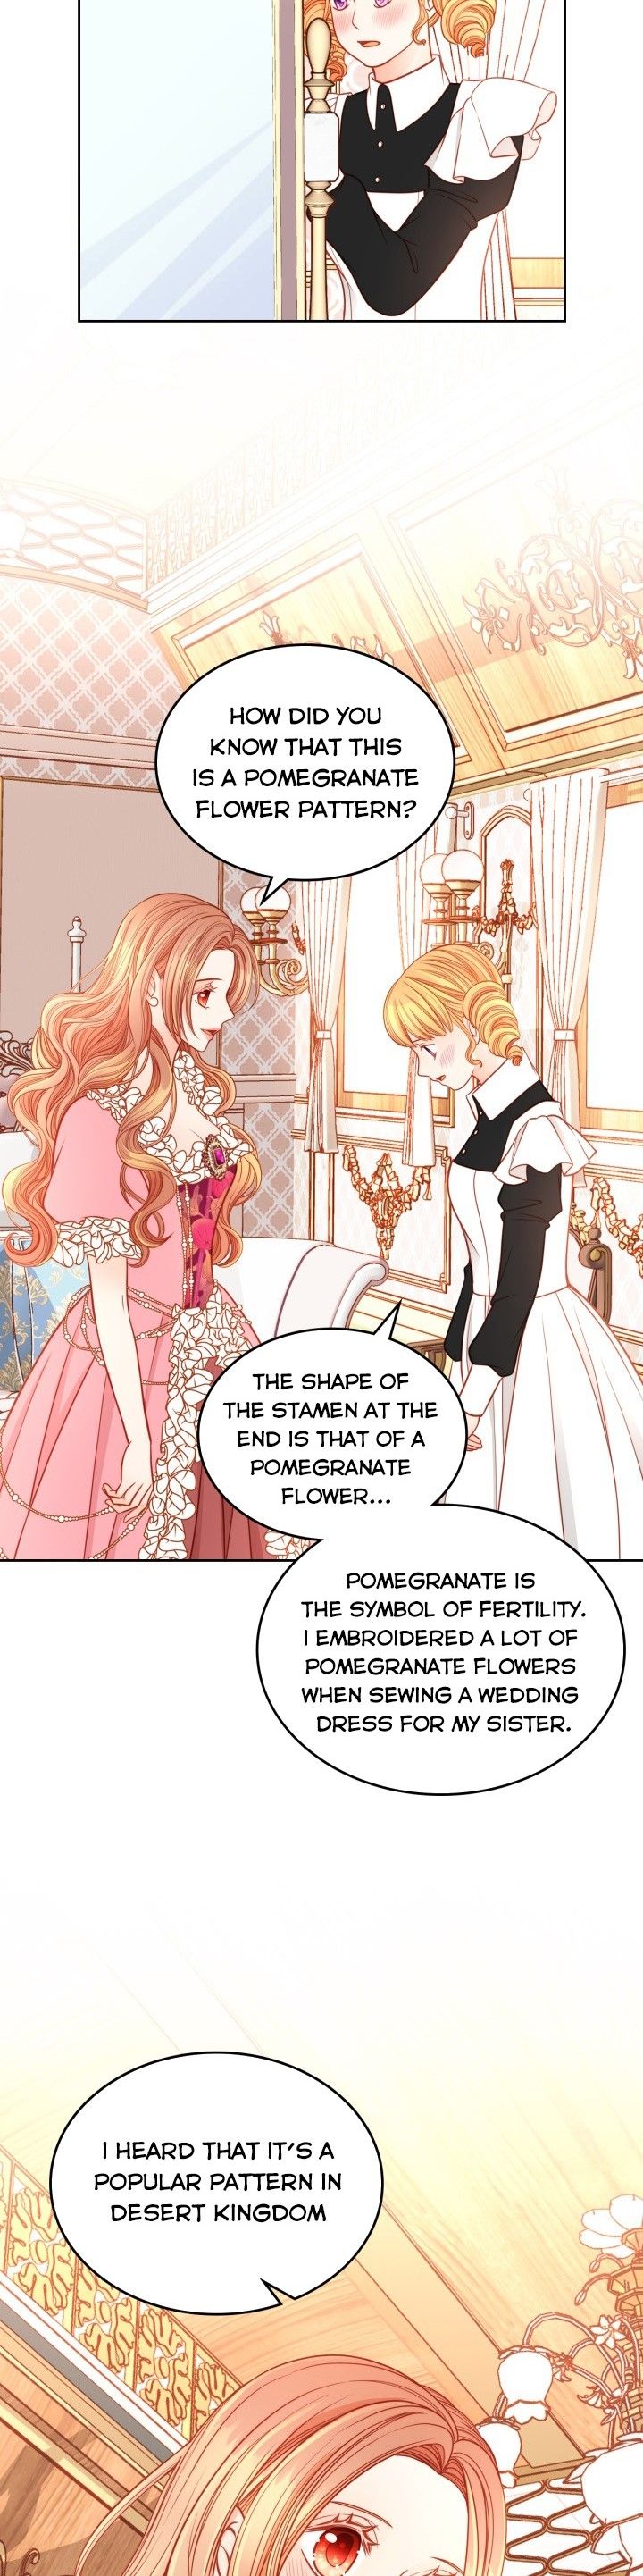 The Duchess’s Secret Dressing Room Chapter 11 - Page 5